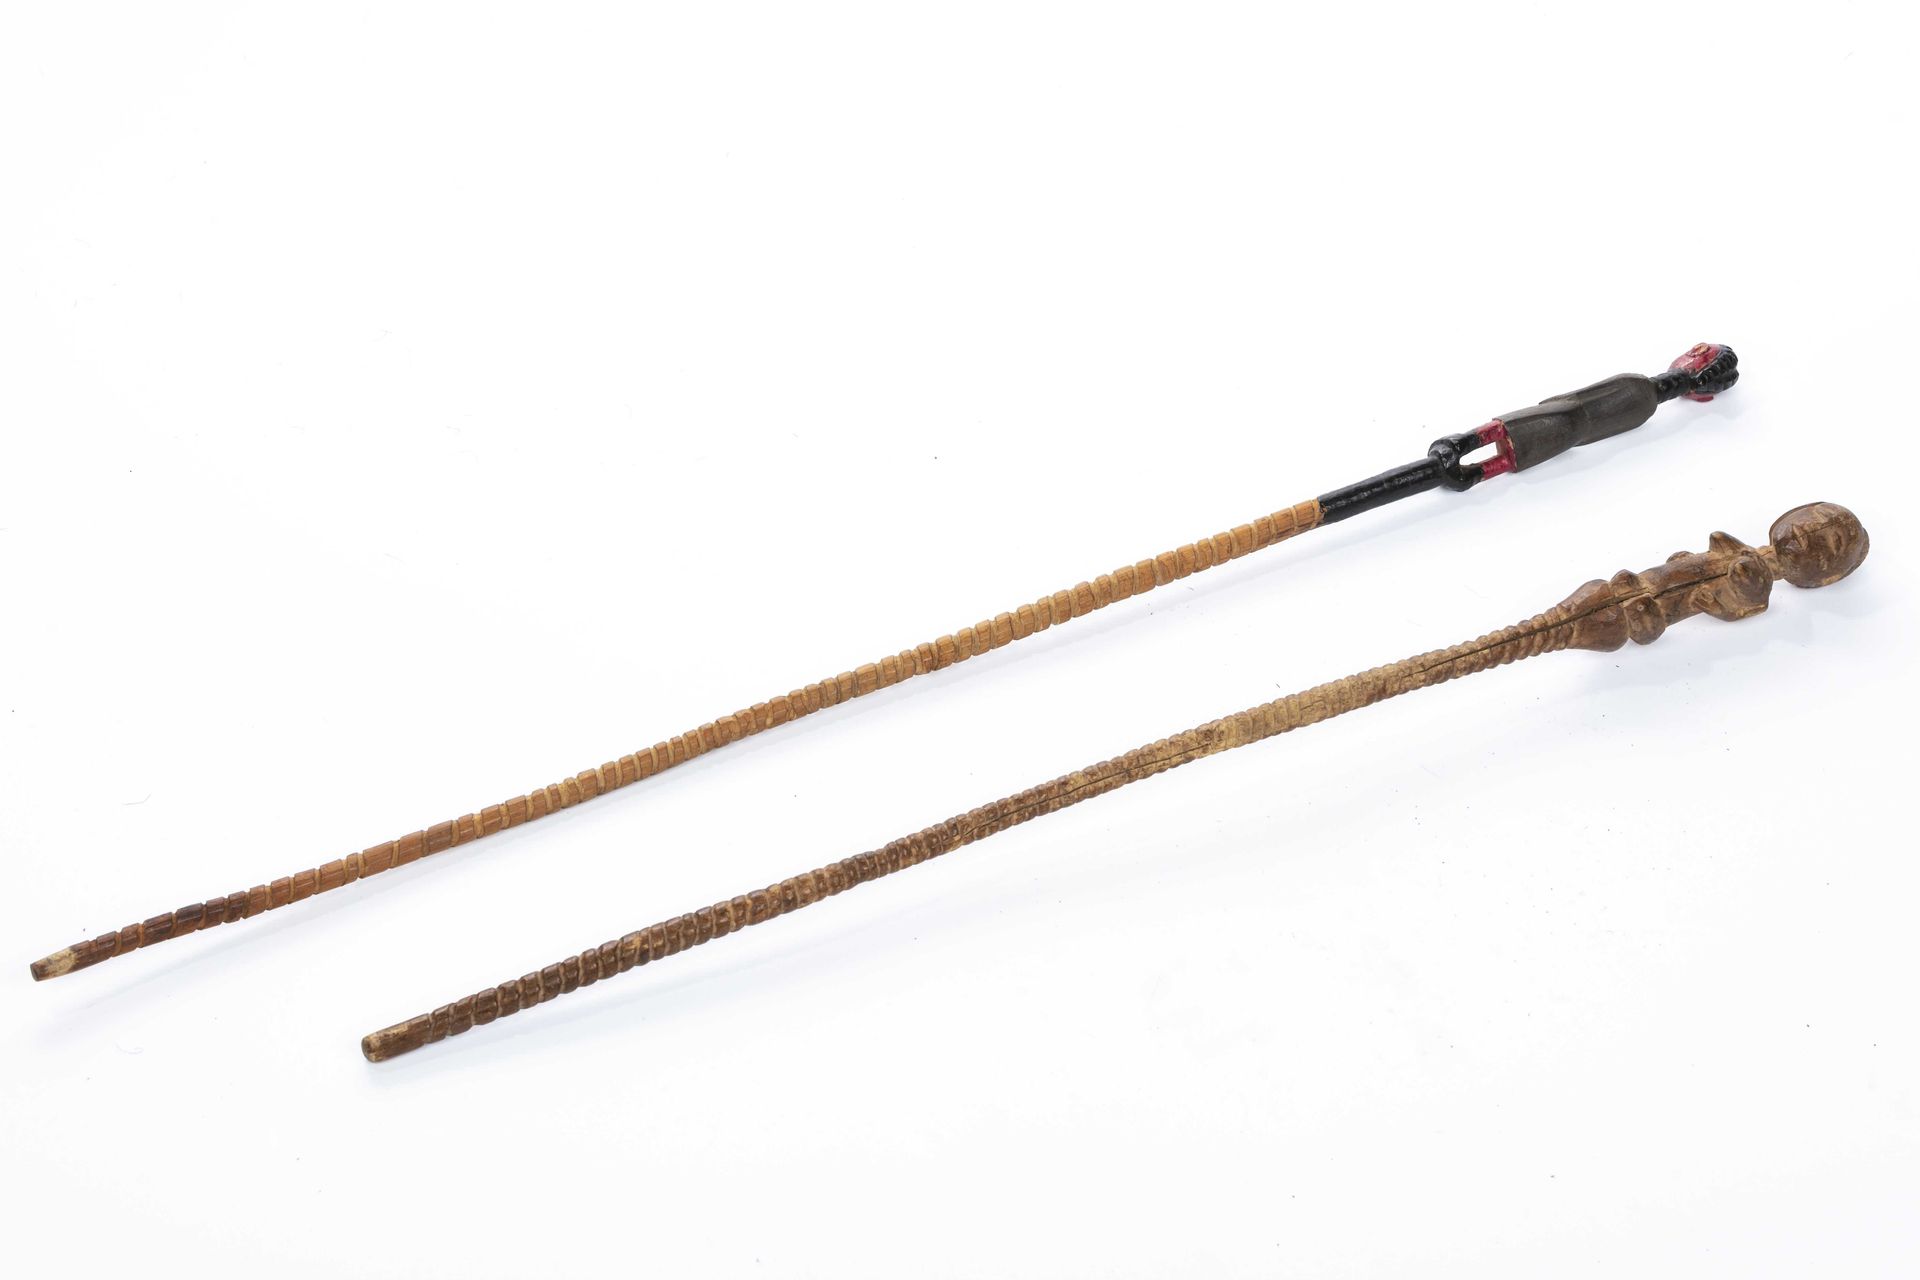 Null Set of scepters
Wood
H : 58 and 49 cm
SET OF 2 SCEPTERS